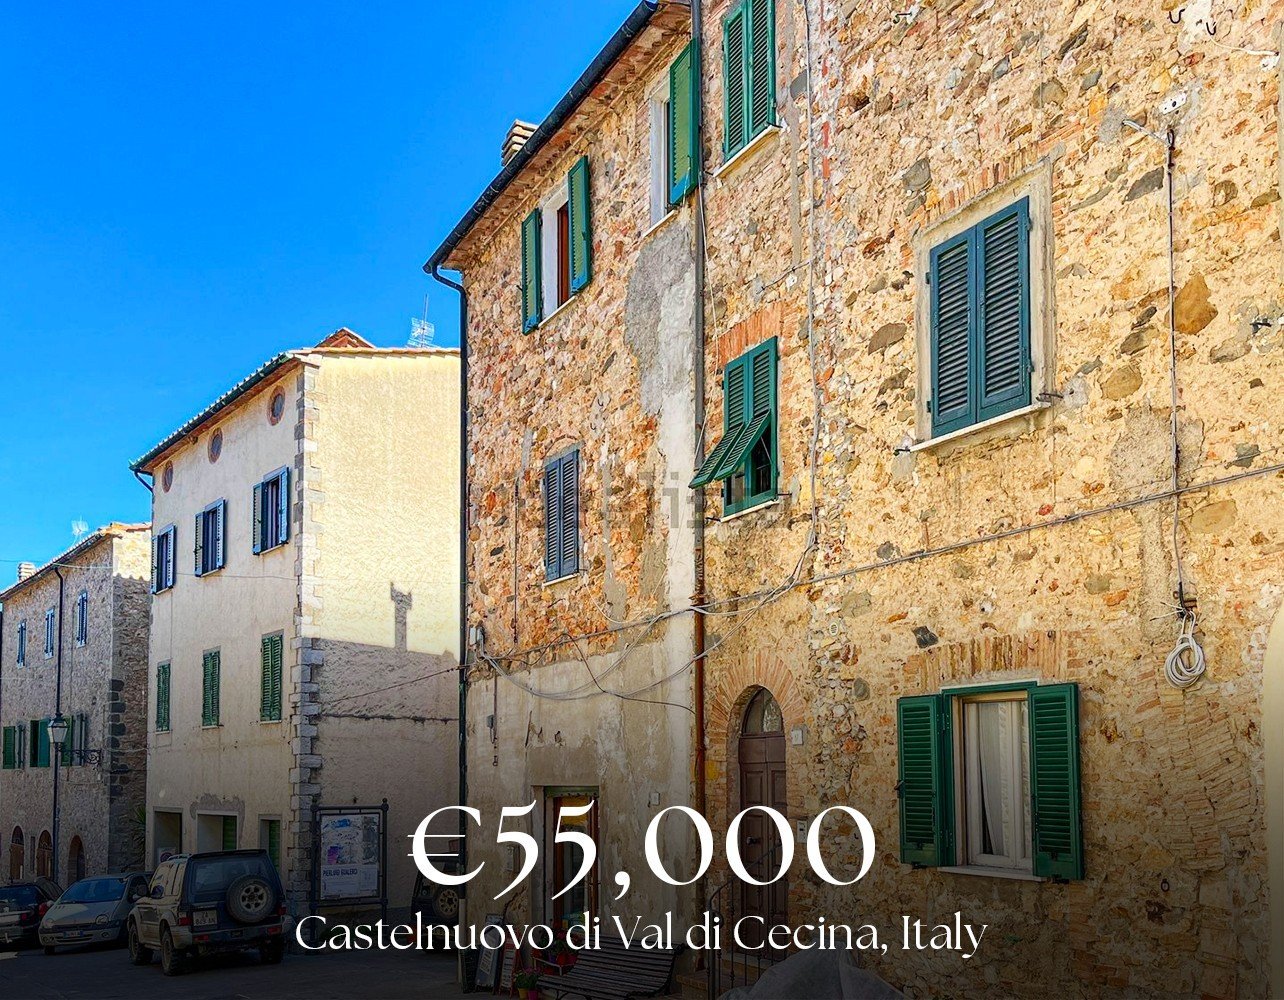 Step into this charming two bedrom trilocale in Castelnuovo di Val di Cecina, where cozy corners and rustic Italian flair await. Picture yourself sipping espresso in the sunlit living room, with the aroma of freshly baked focaccia lingering in the ai